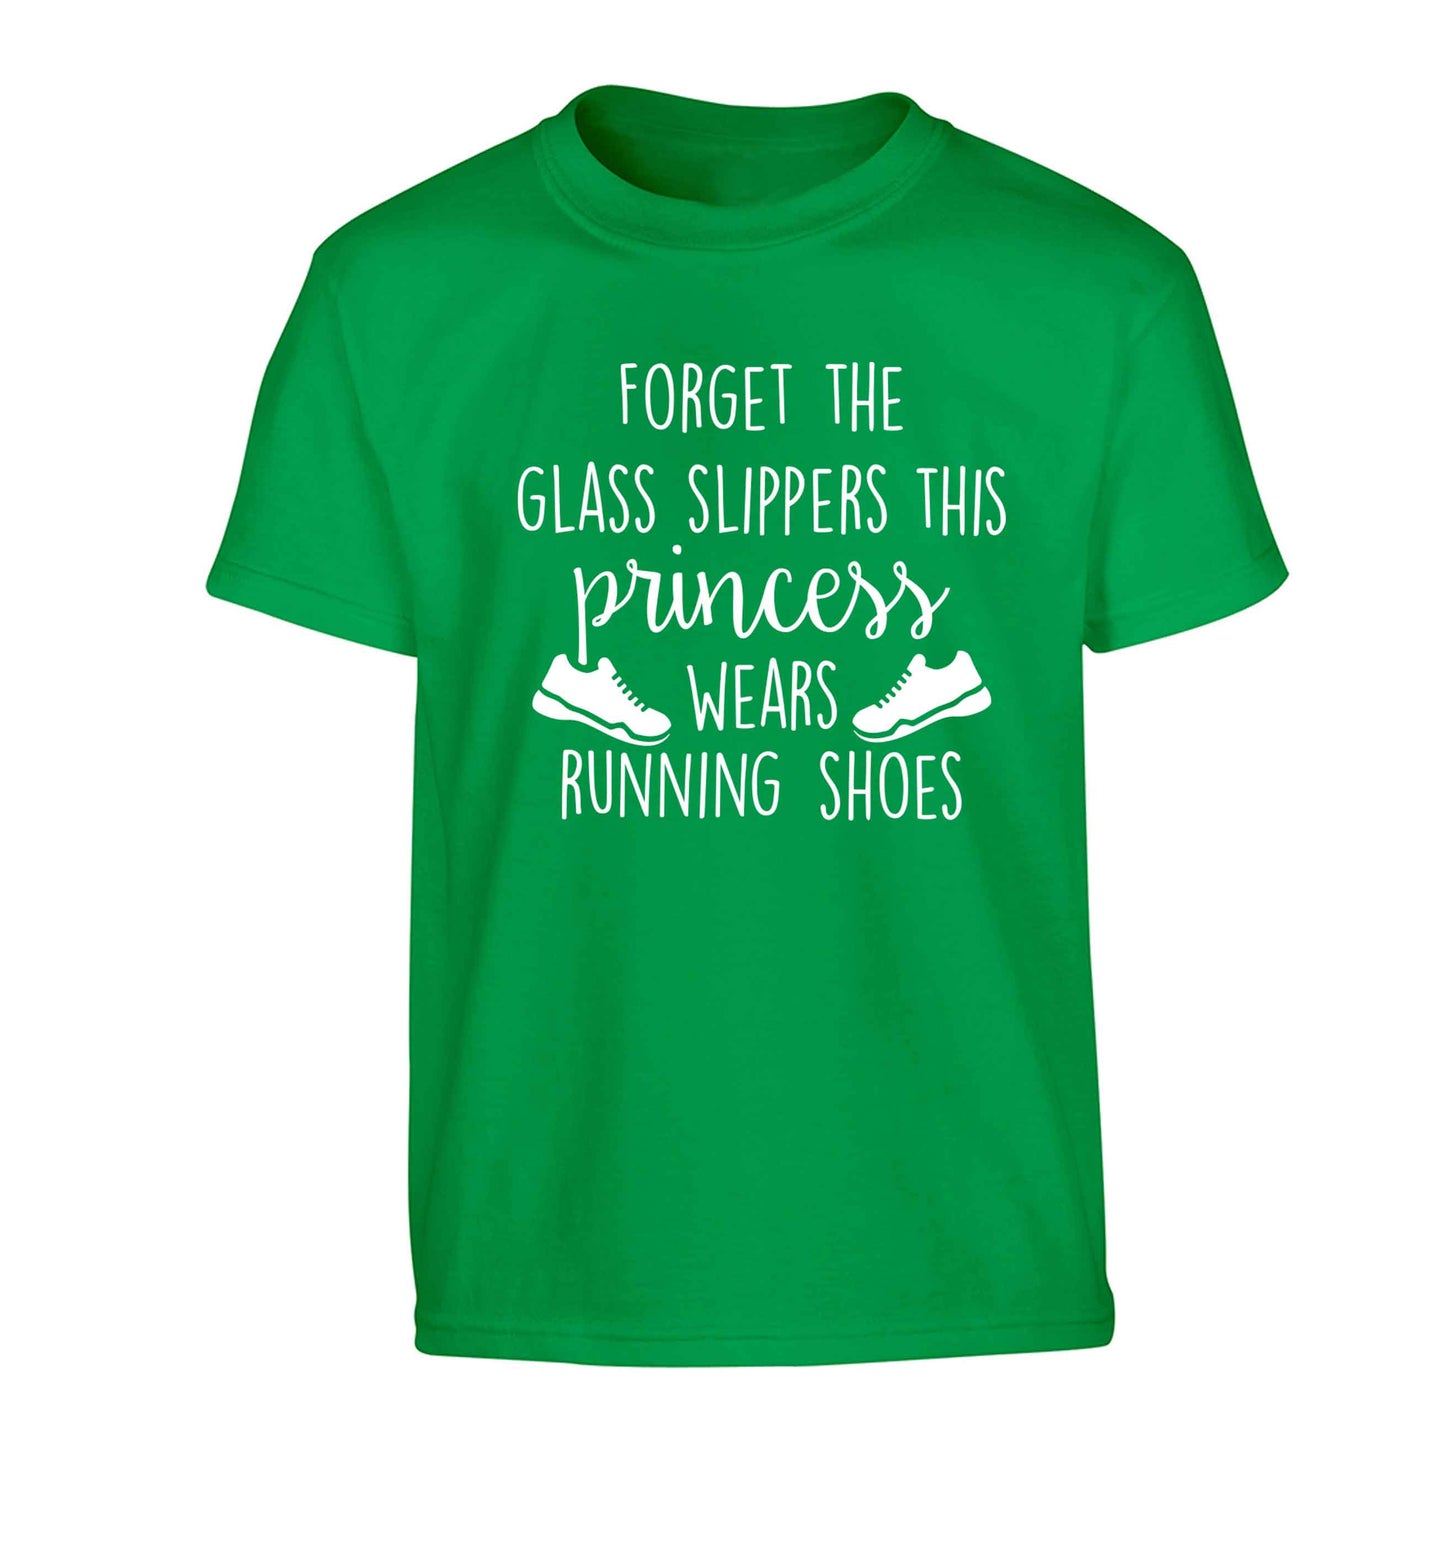 Forget the glass slippers this princess wears running shoes Children's green Tshirt 12-13 Years